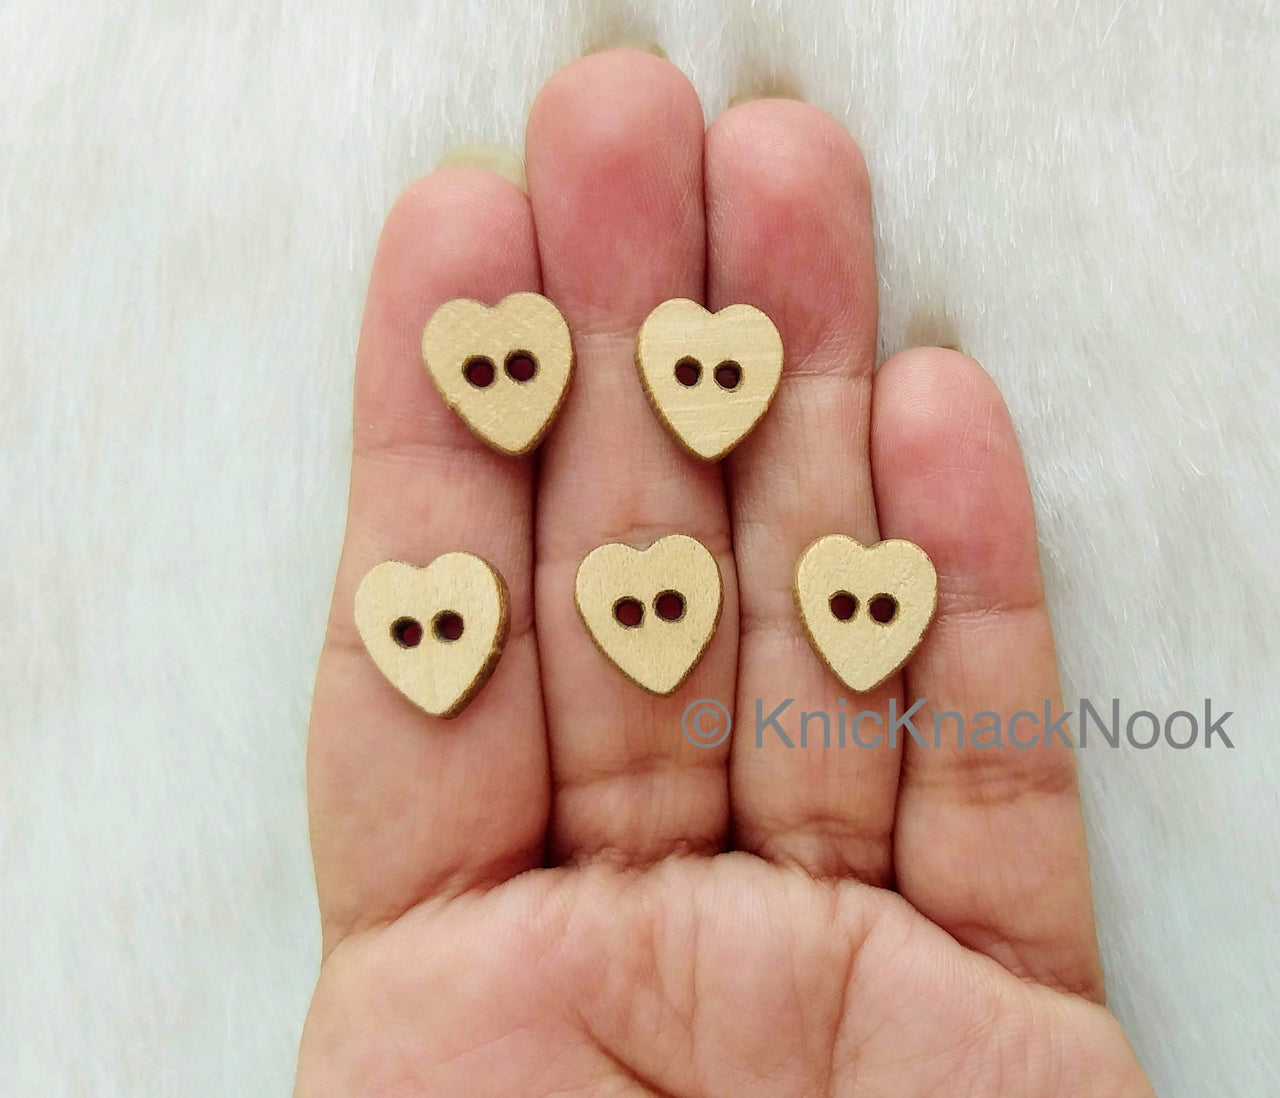 Brown Heart Shaped Wood Buttons